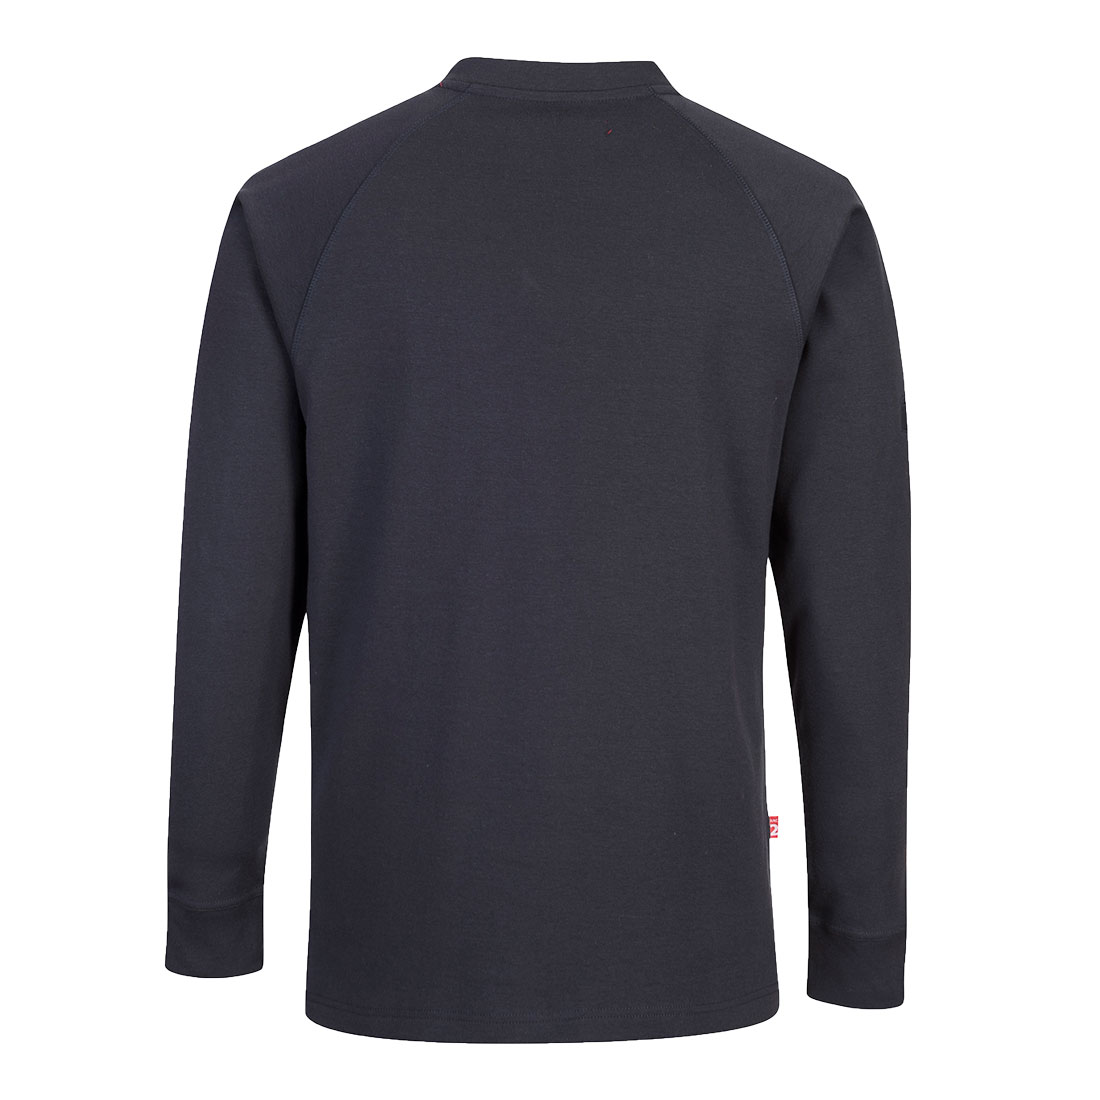 Flame Resistant Anti-Static Comforable Cool Crew Neck